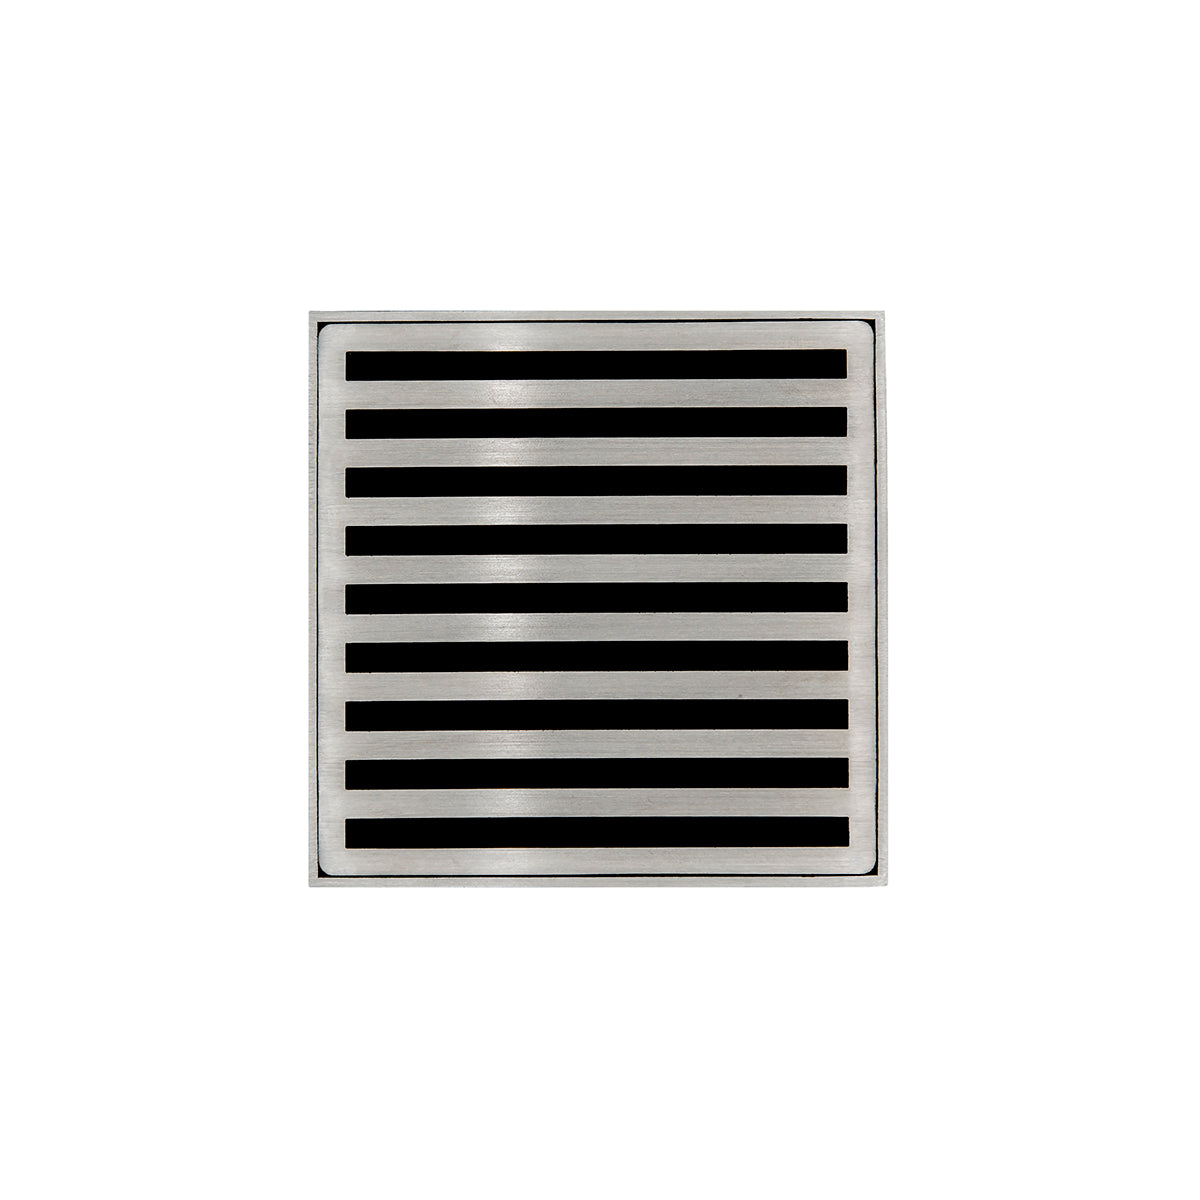 Infinity Drain 5" x 5" NDB 5 Premium Center Drain Kit with Lines Pattern Decorative Plate with Stainless Steel Bonded Flange Drain Body, 2" No Hub Outlet